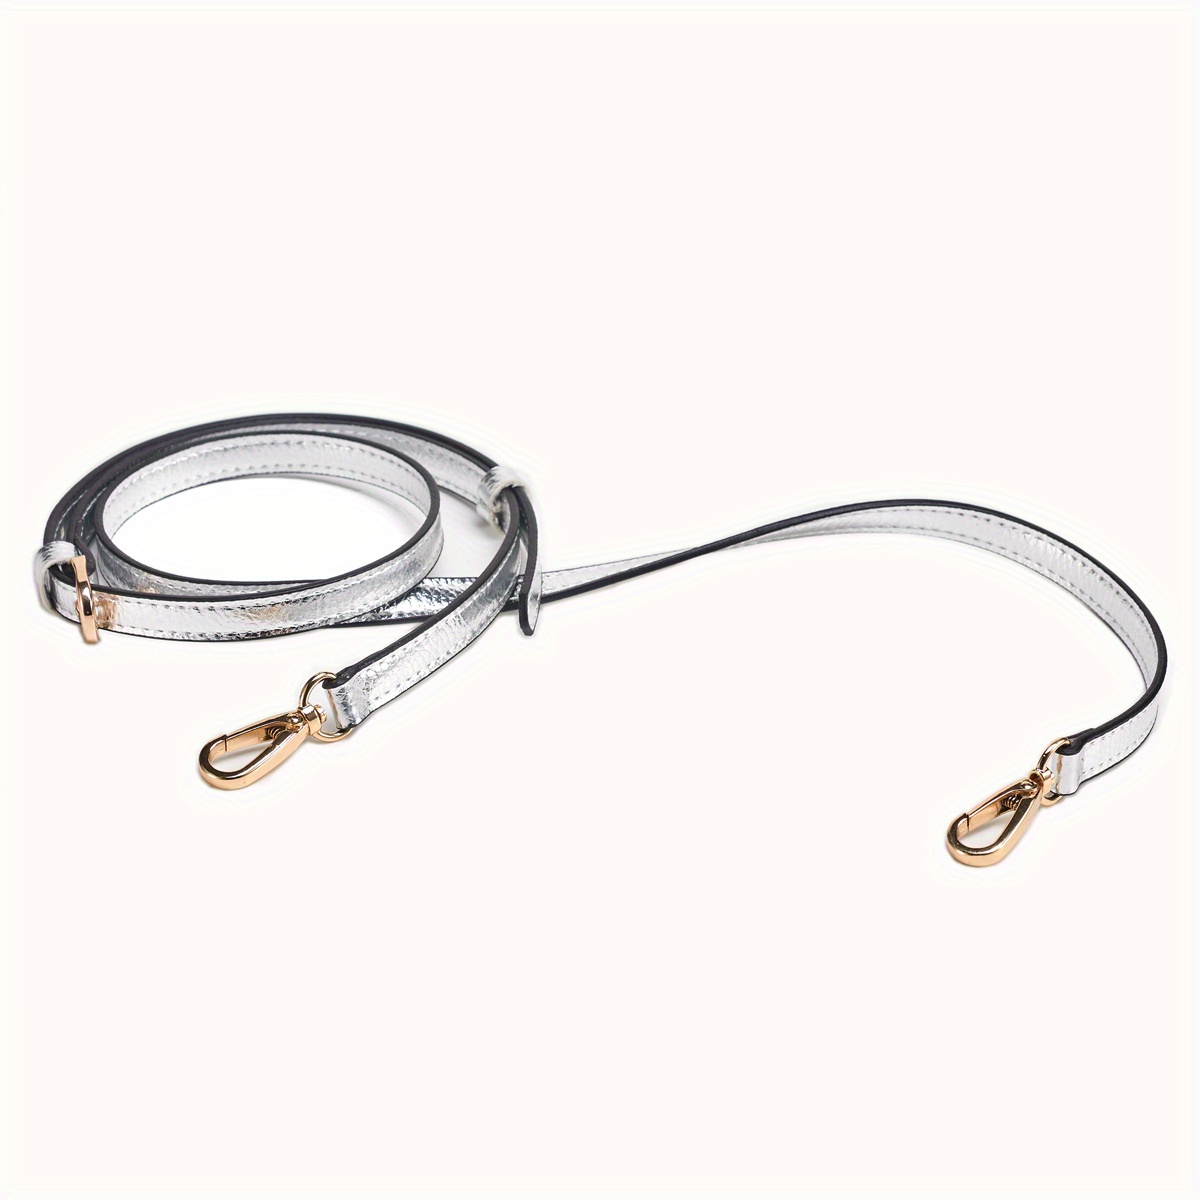 Genuine Leather Shoulder Strap 90cm Length, Silver & Gold Buckle, Wide  Replacement For Bag Strap From Wondernice, $7.59